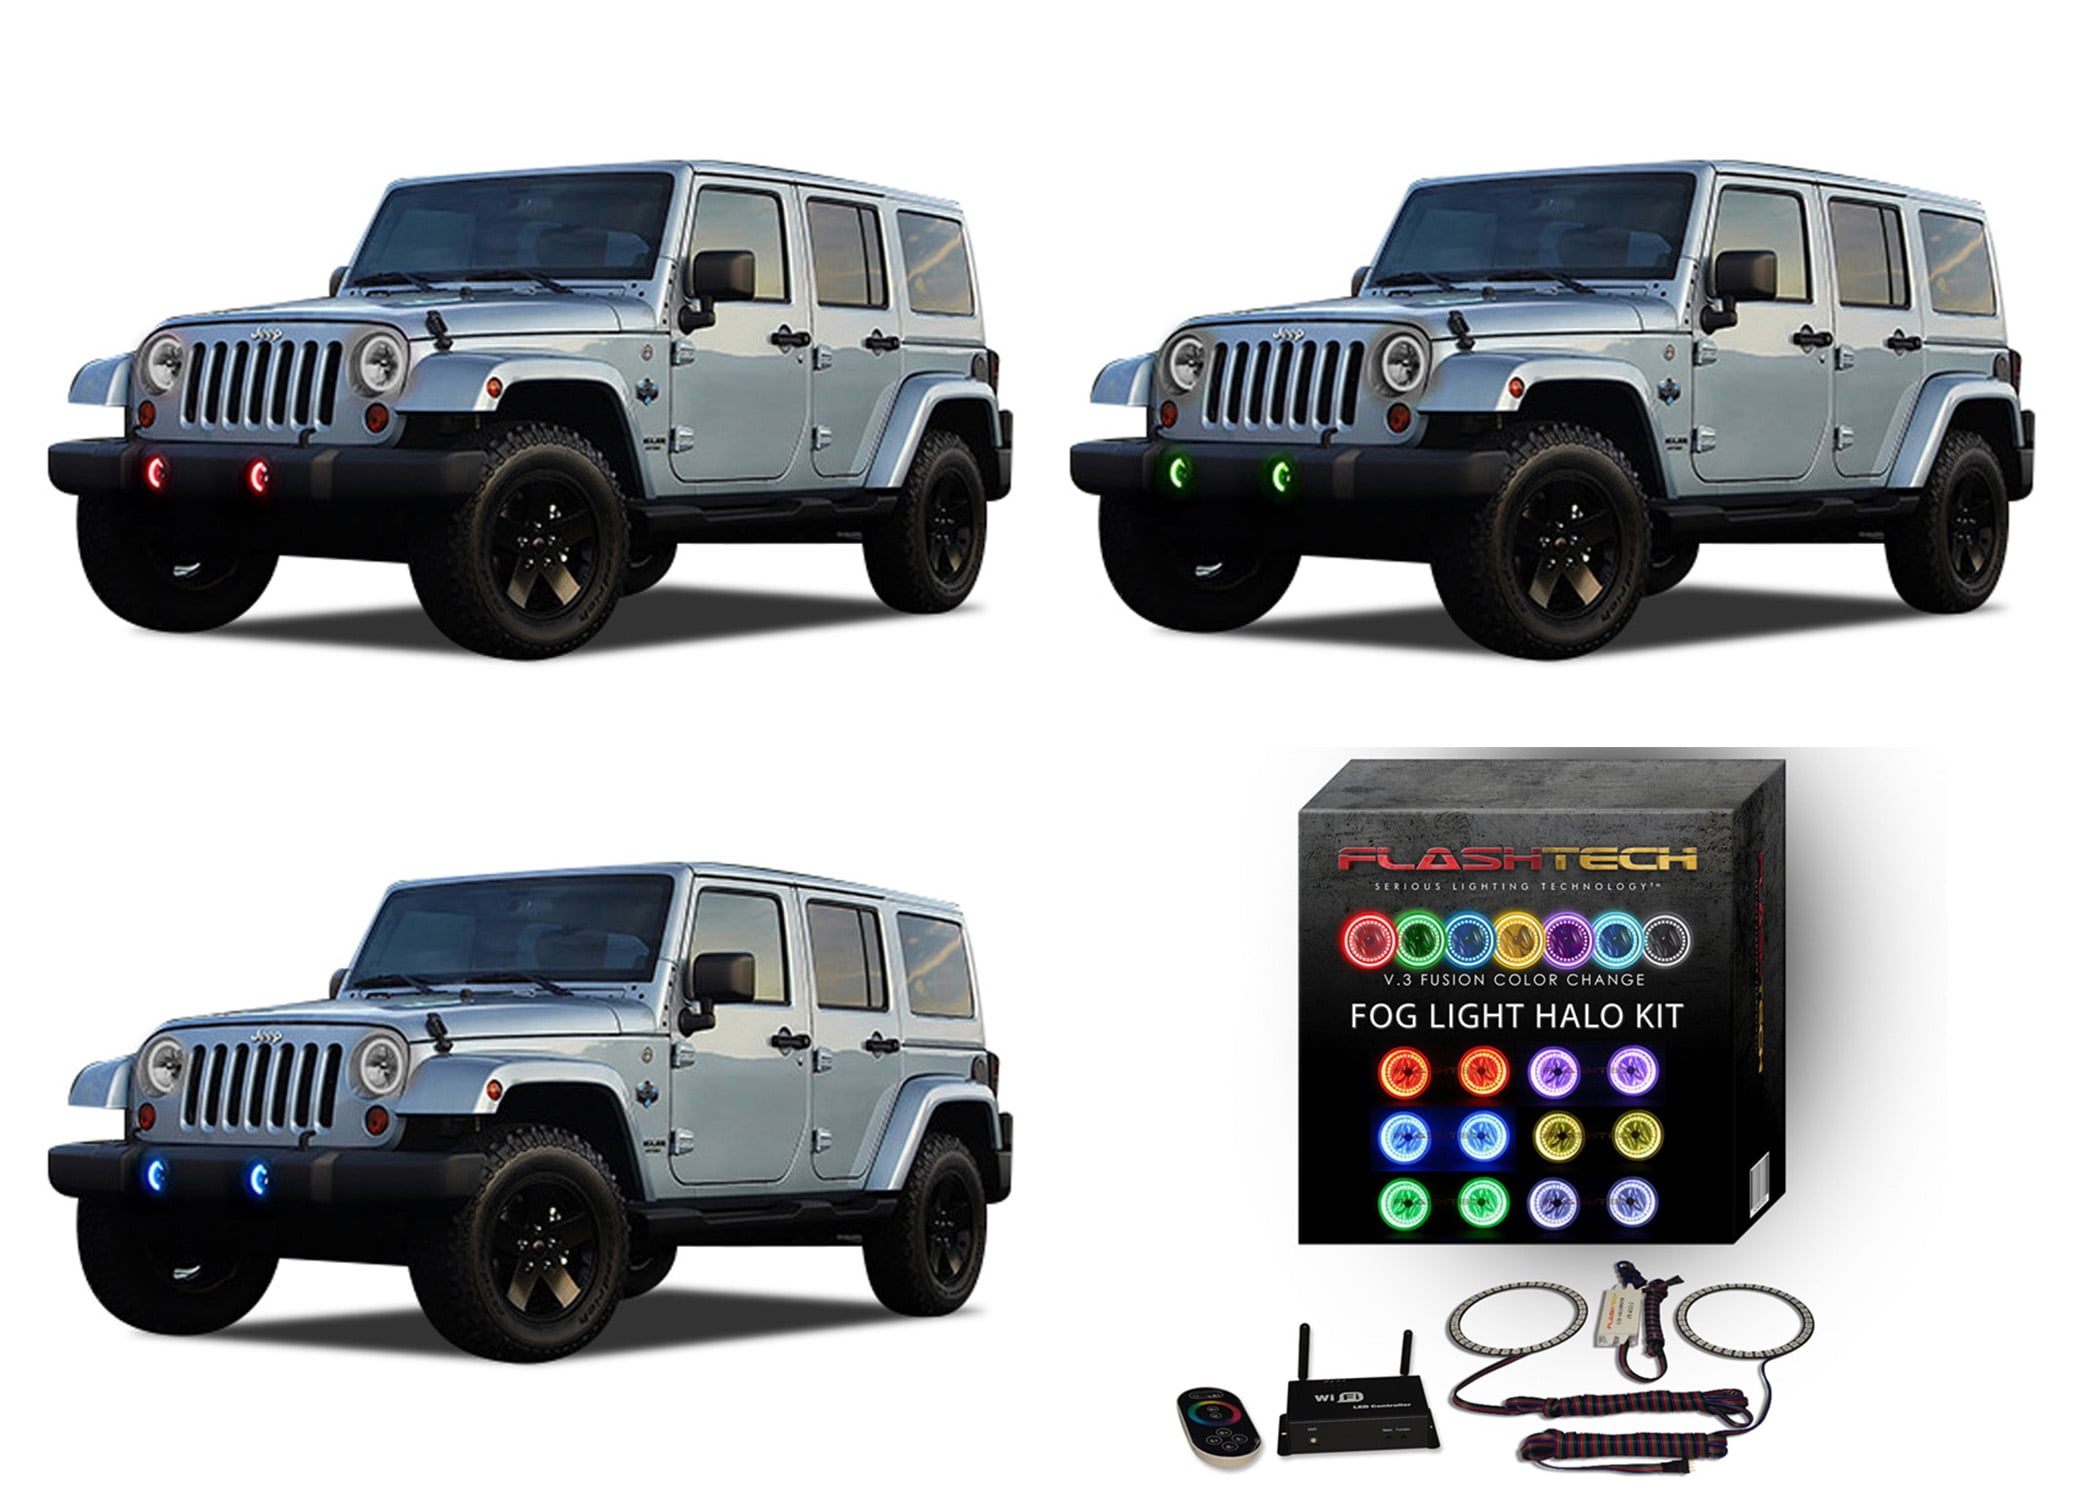 Flashtech LED RGB Multi Color Halo Ring Fog Light Kit for Jeep Wrangler  07-17 with  Fusion Color Change Wifi Remote 